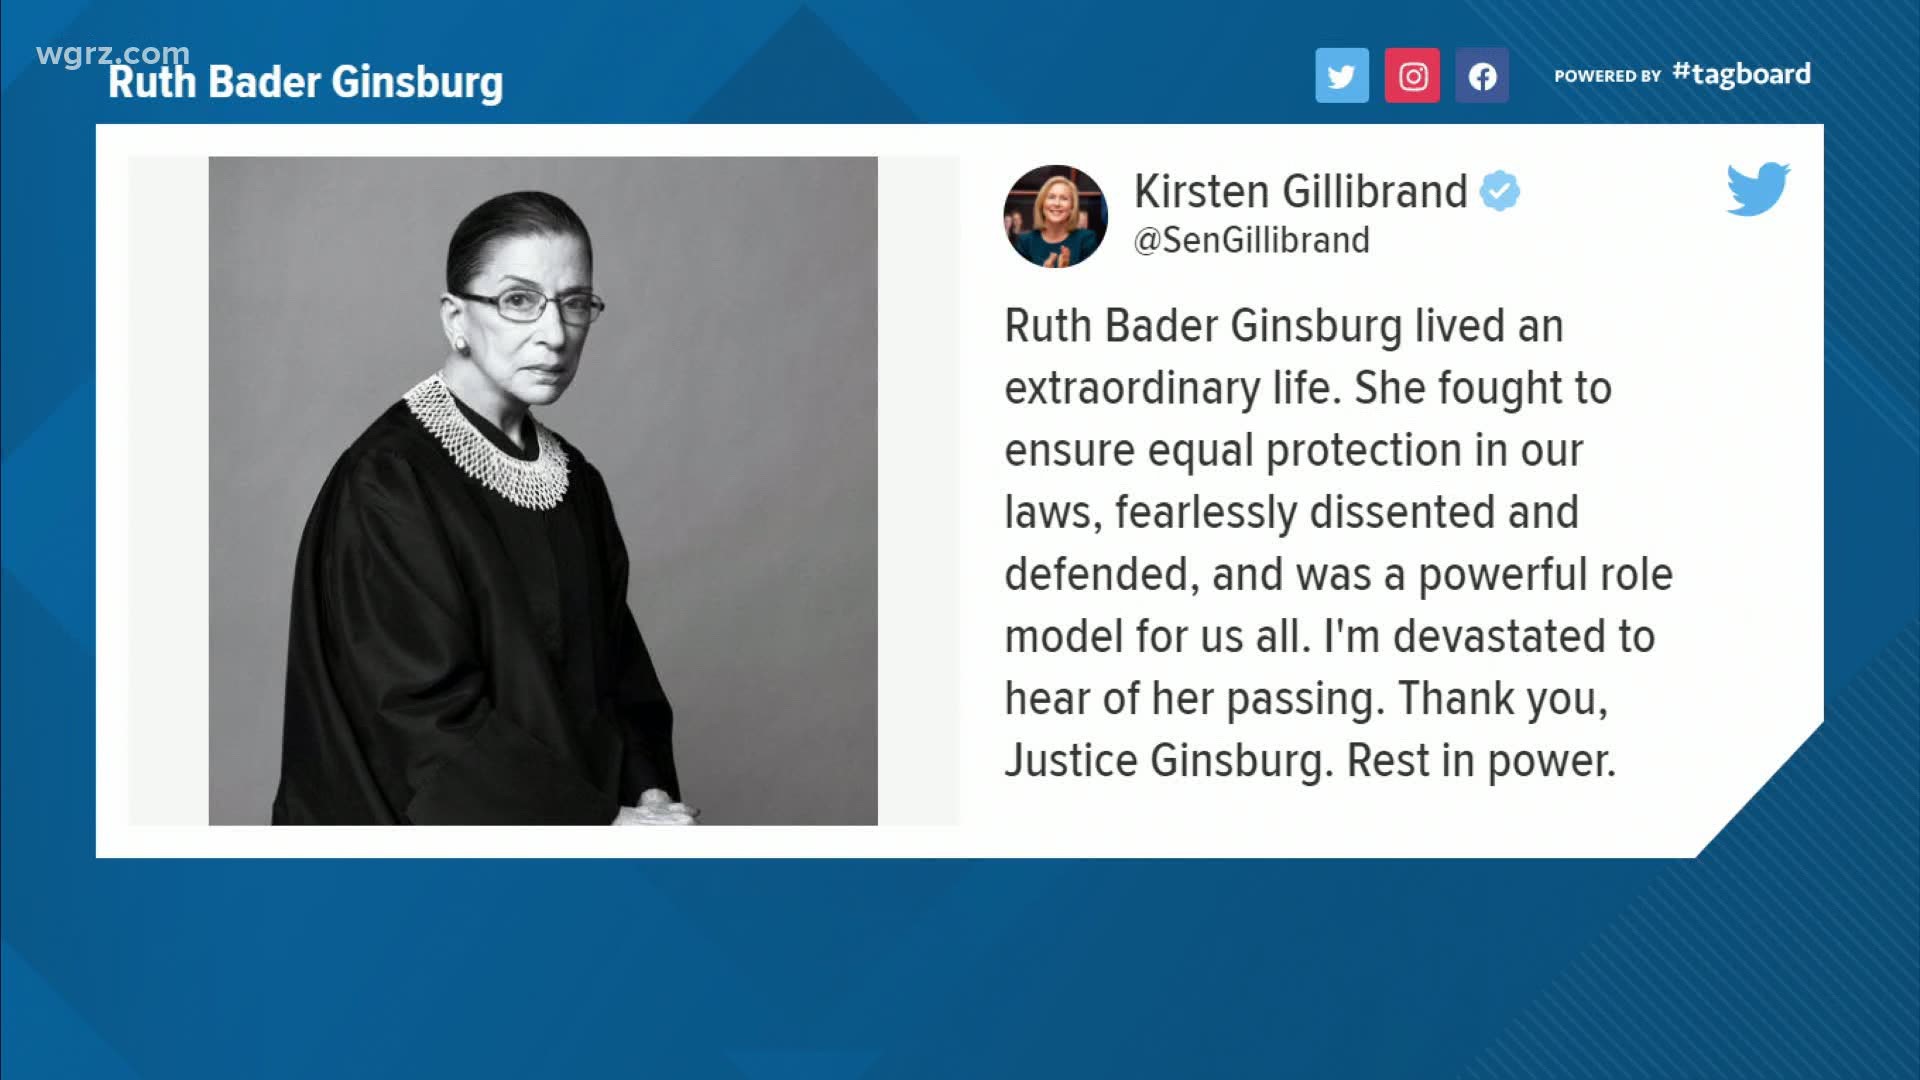 Many elected officials paid their respects to Supreme Court Justice Ruth Bader Ginsburg, who passed away Friday night.